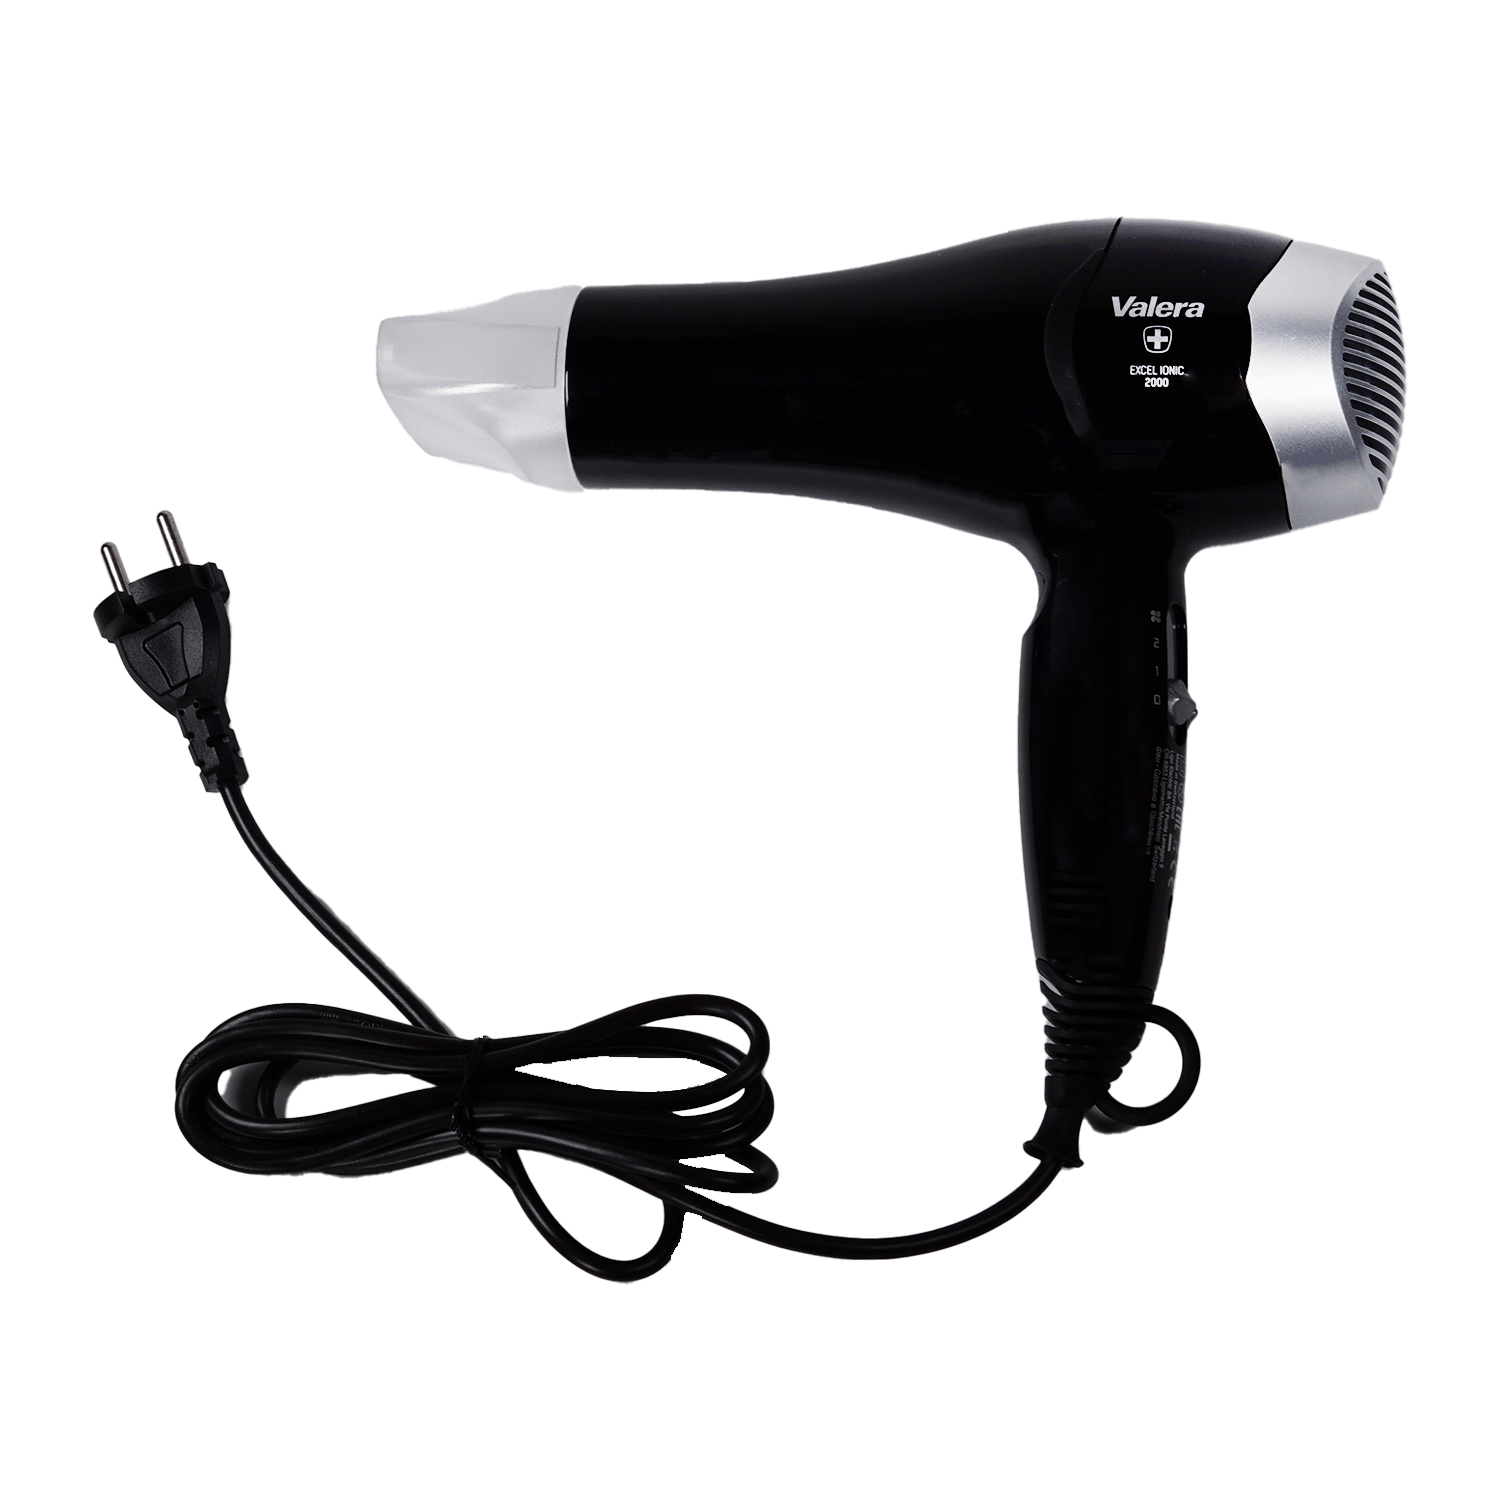 Hair dryer Excel Ionic